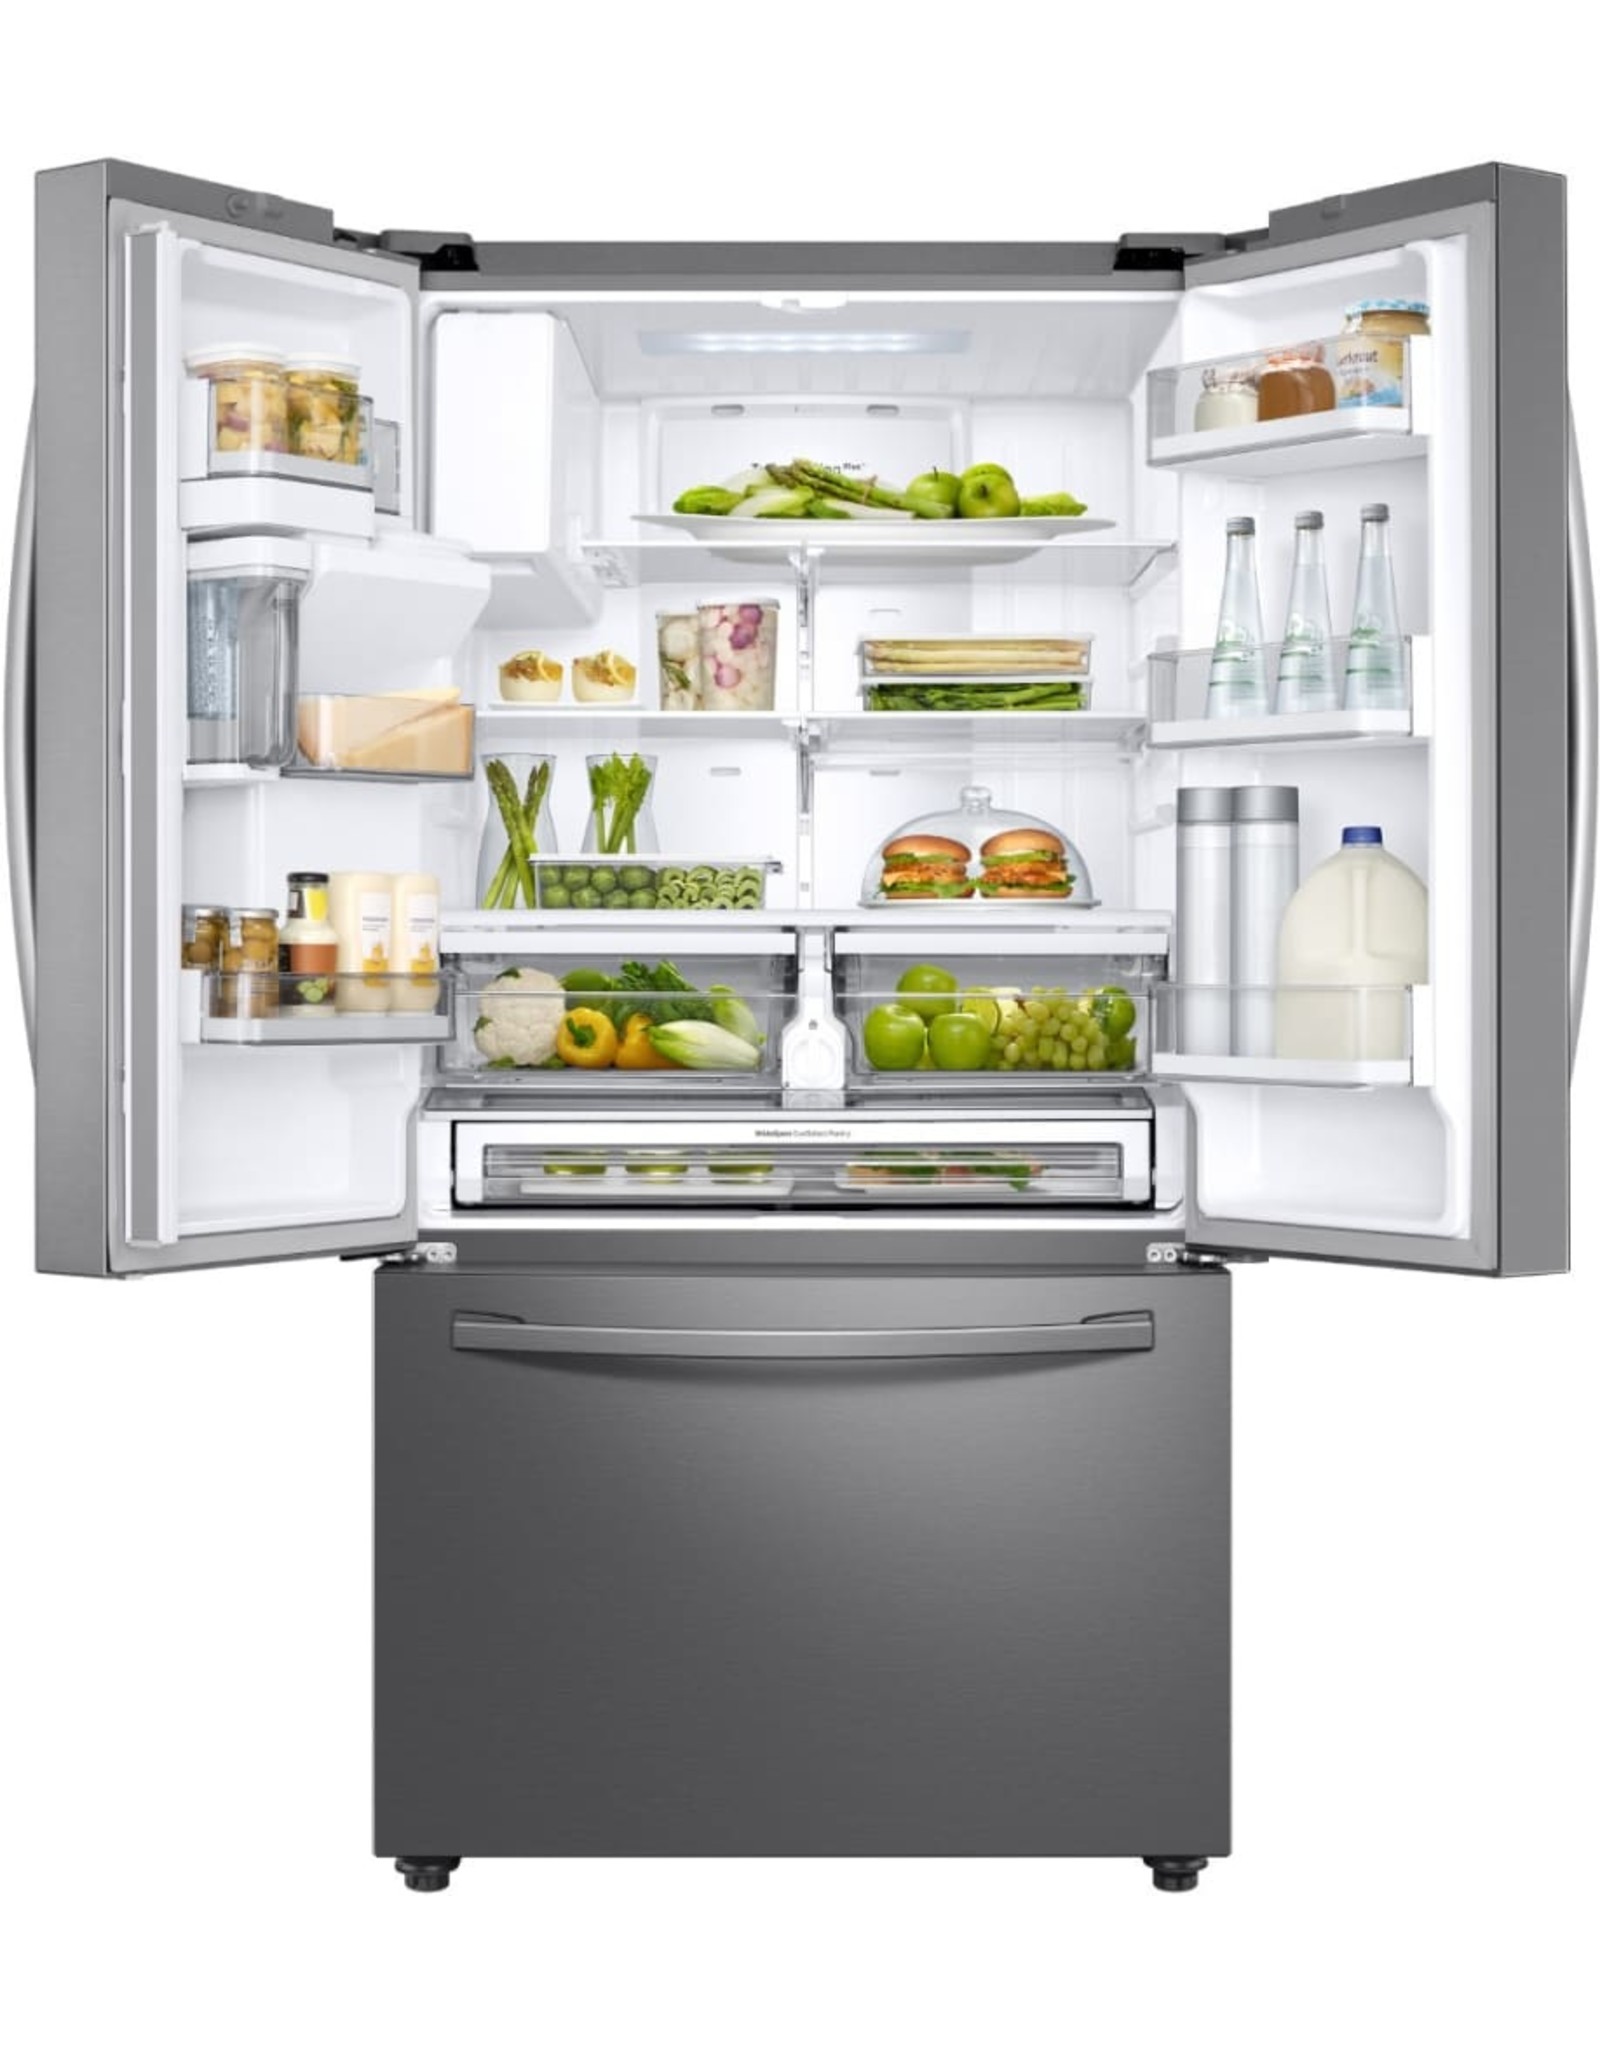 SAMSUNG RF28R6221SR 28 cu. ft. 3-Door French Door Refrigerator in Stainless Steel with AutoFill Water Pitcher